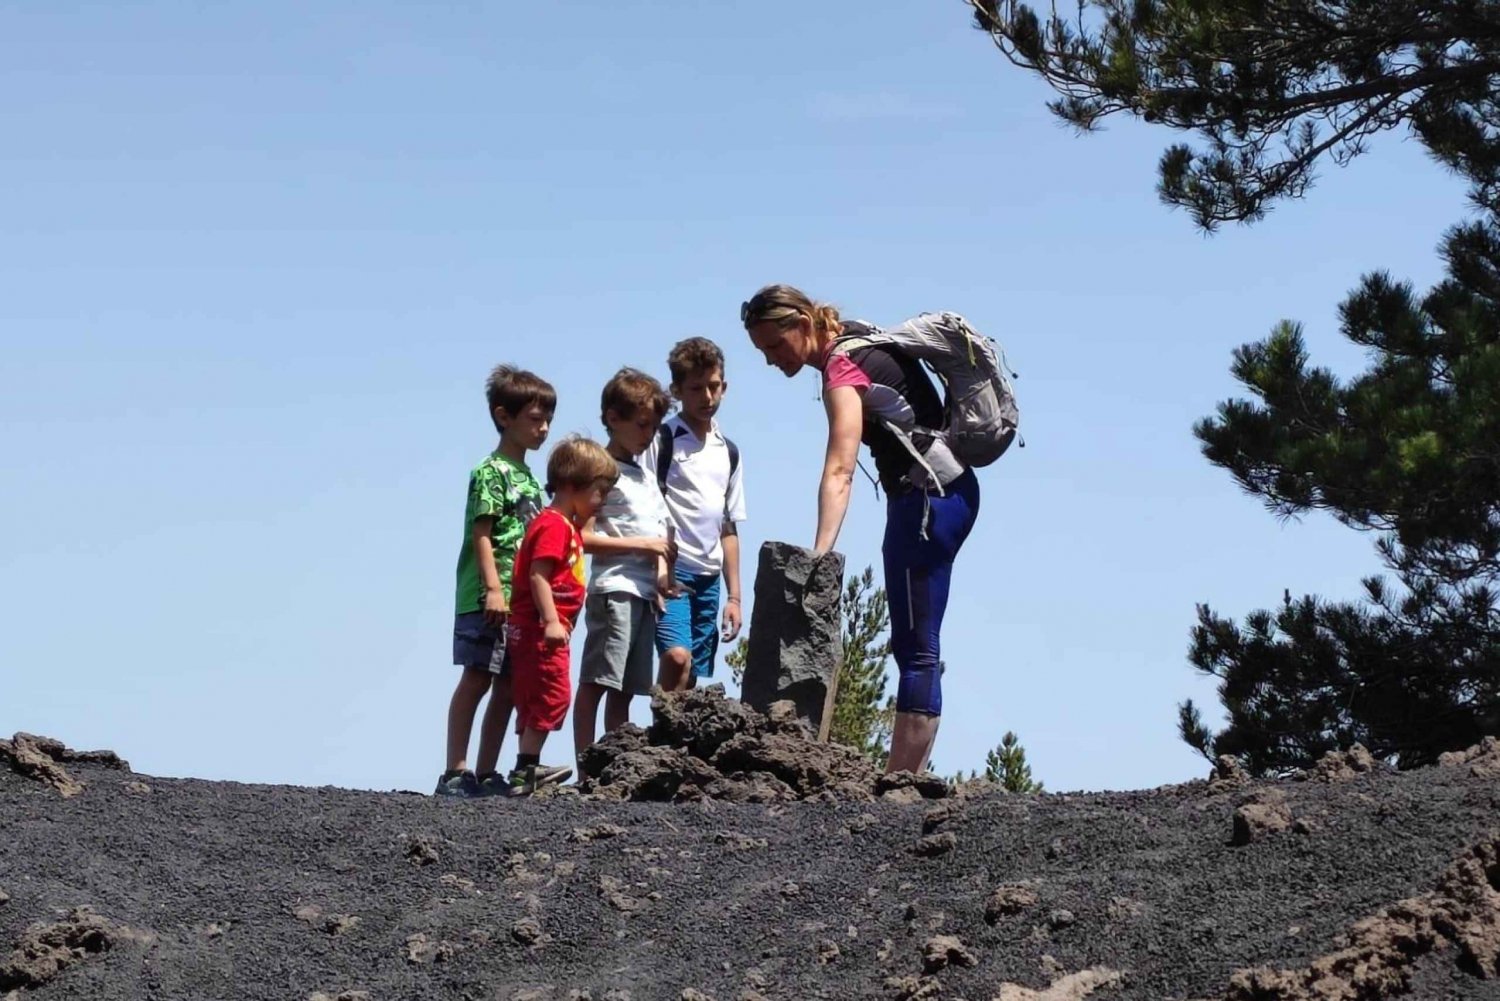 Catania&Mount Etna: private guided family-friendly tour